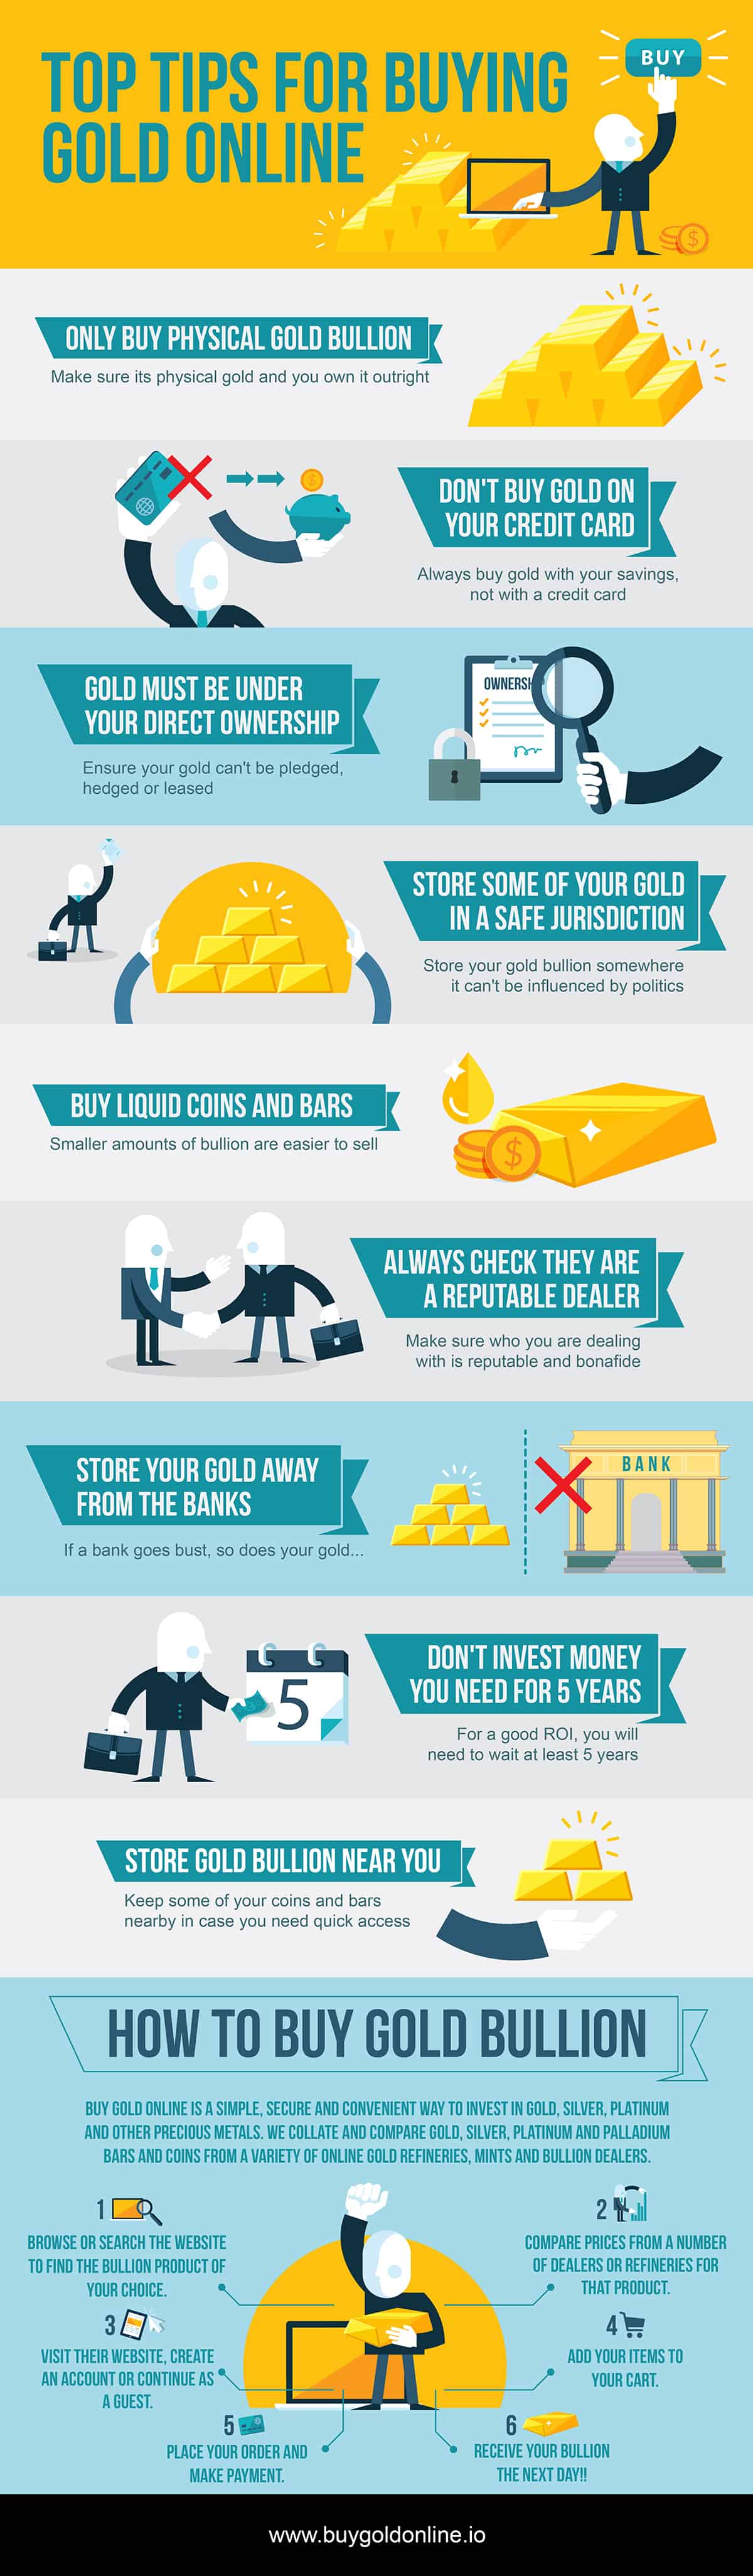 How To Buy Gold Bars and Coins Safely Online